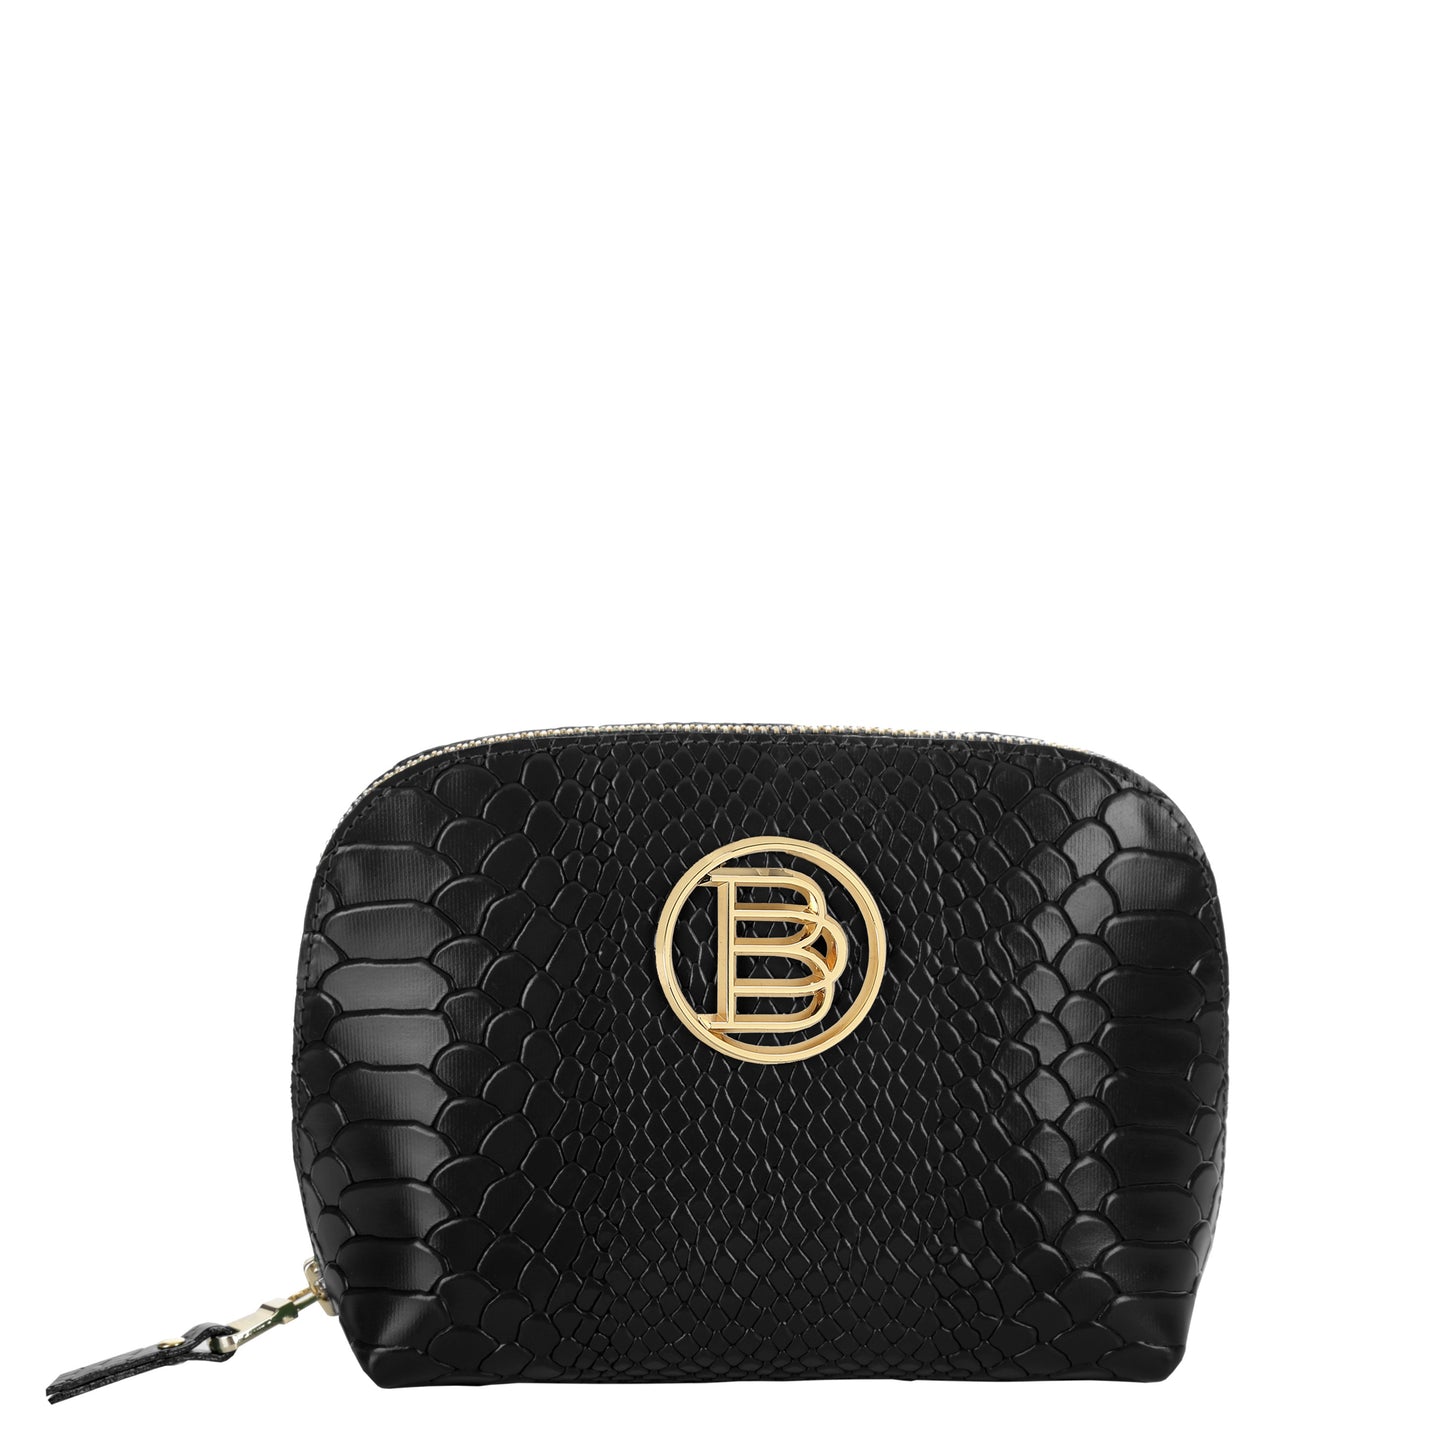 BLACK leather women's cosmetic bag